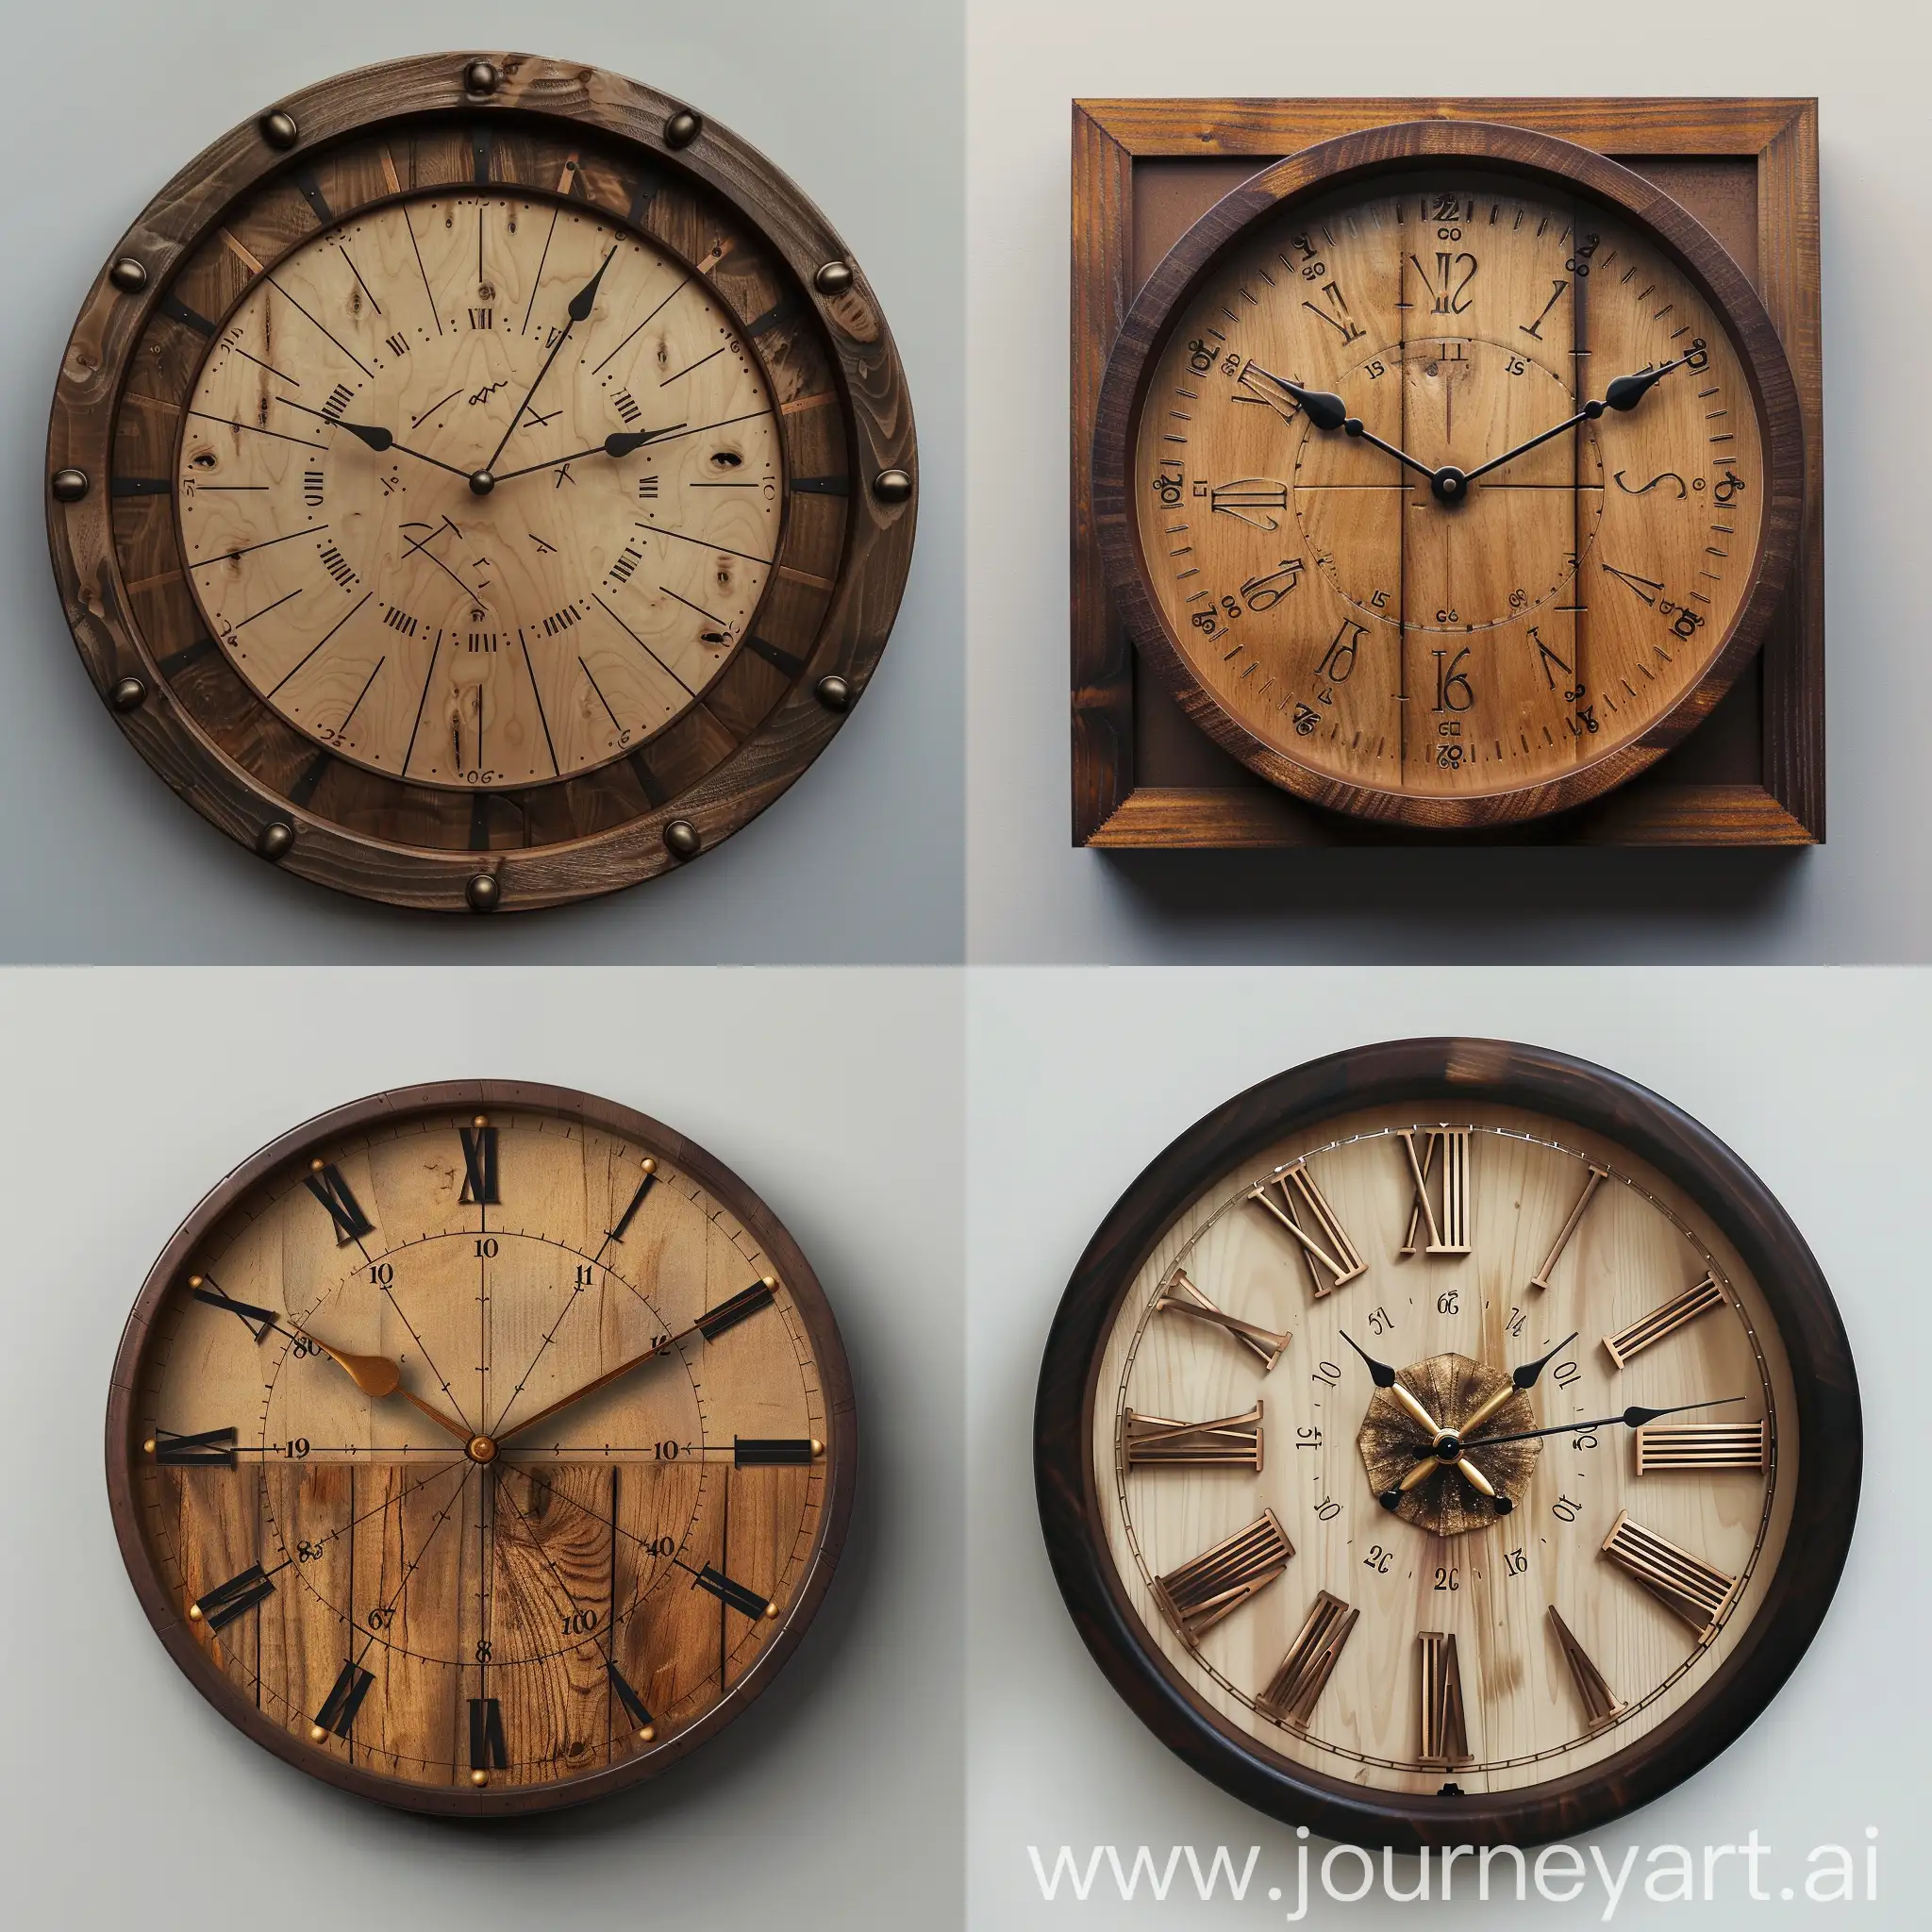 Wooden-Wall-Clock-with-Bronze-Decimal-Numbers-in-Hyperrealistic-Photography